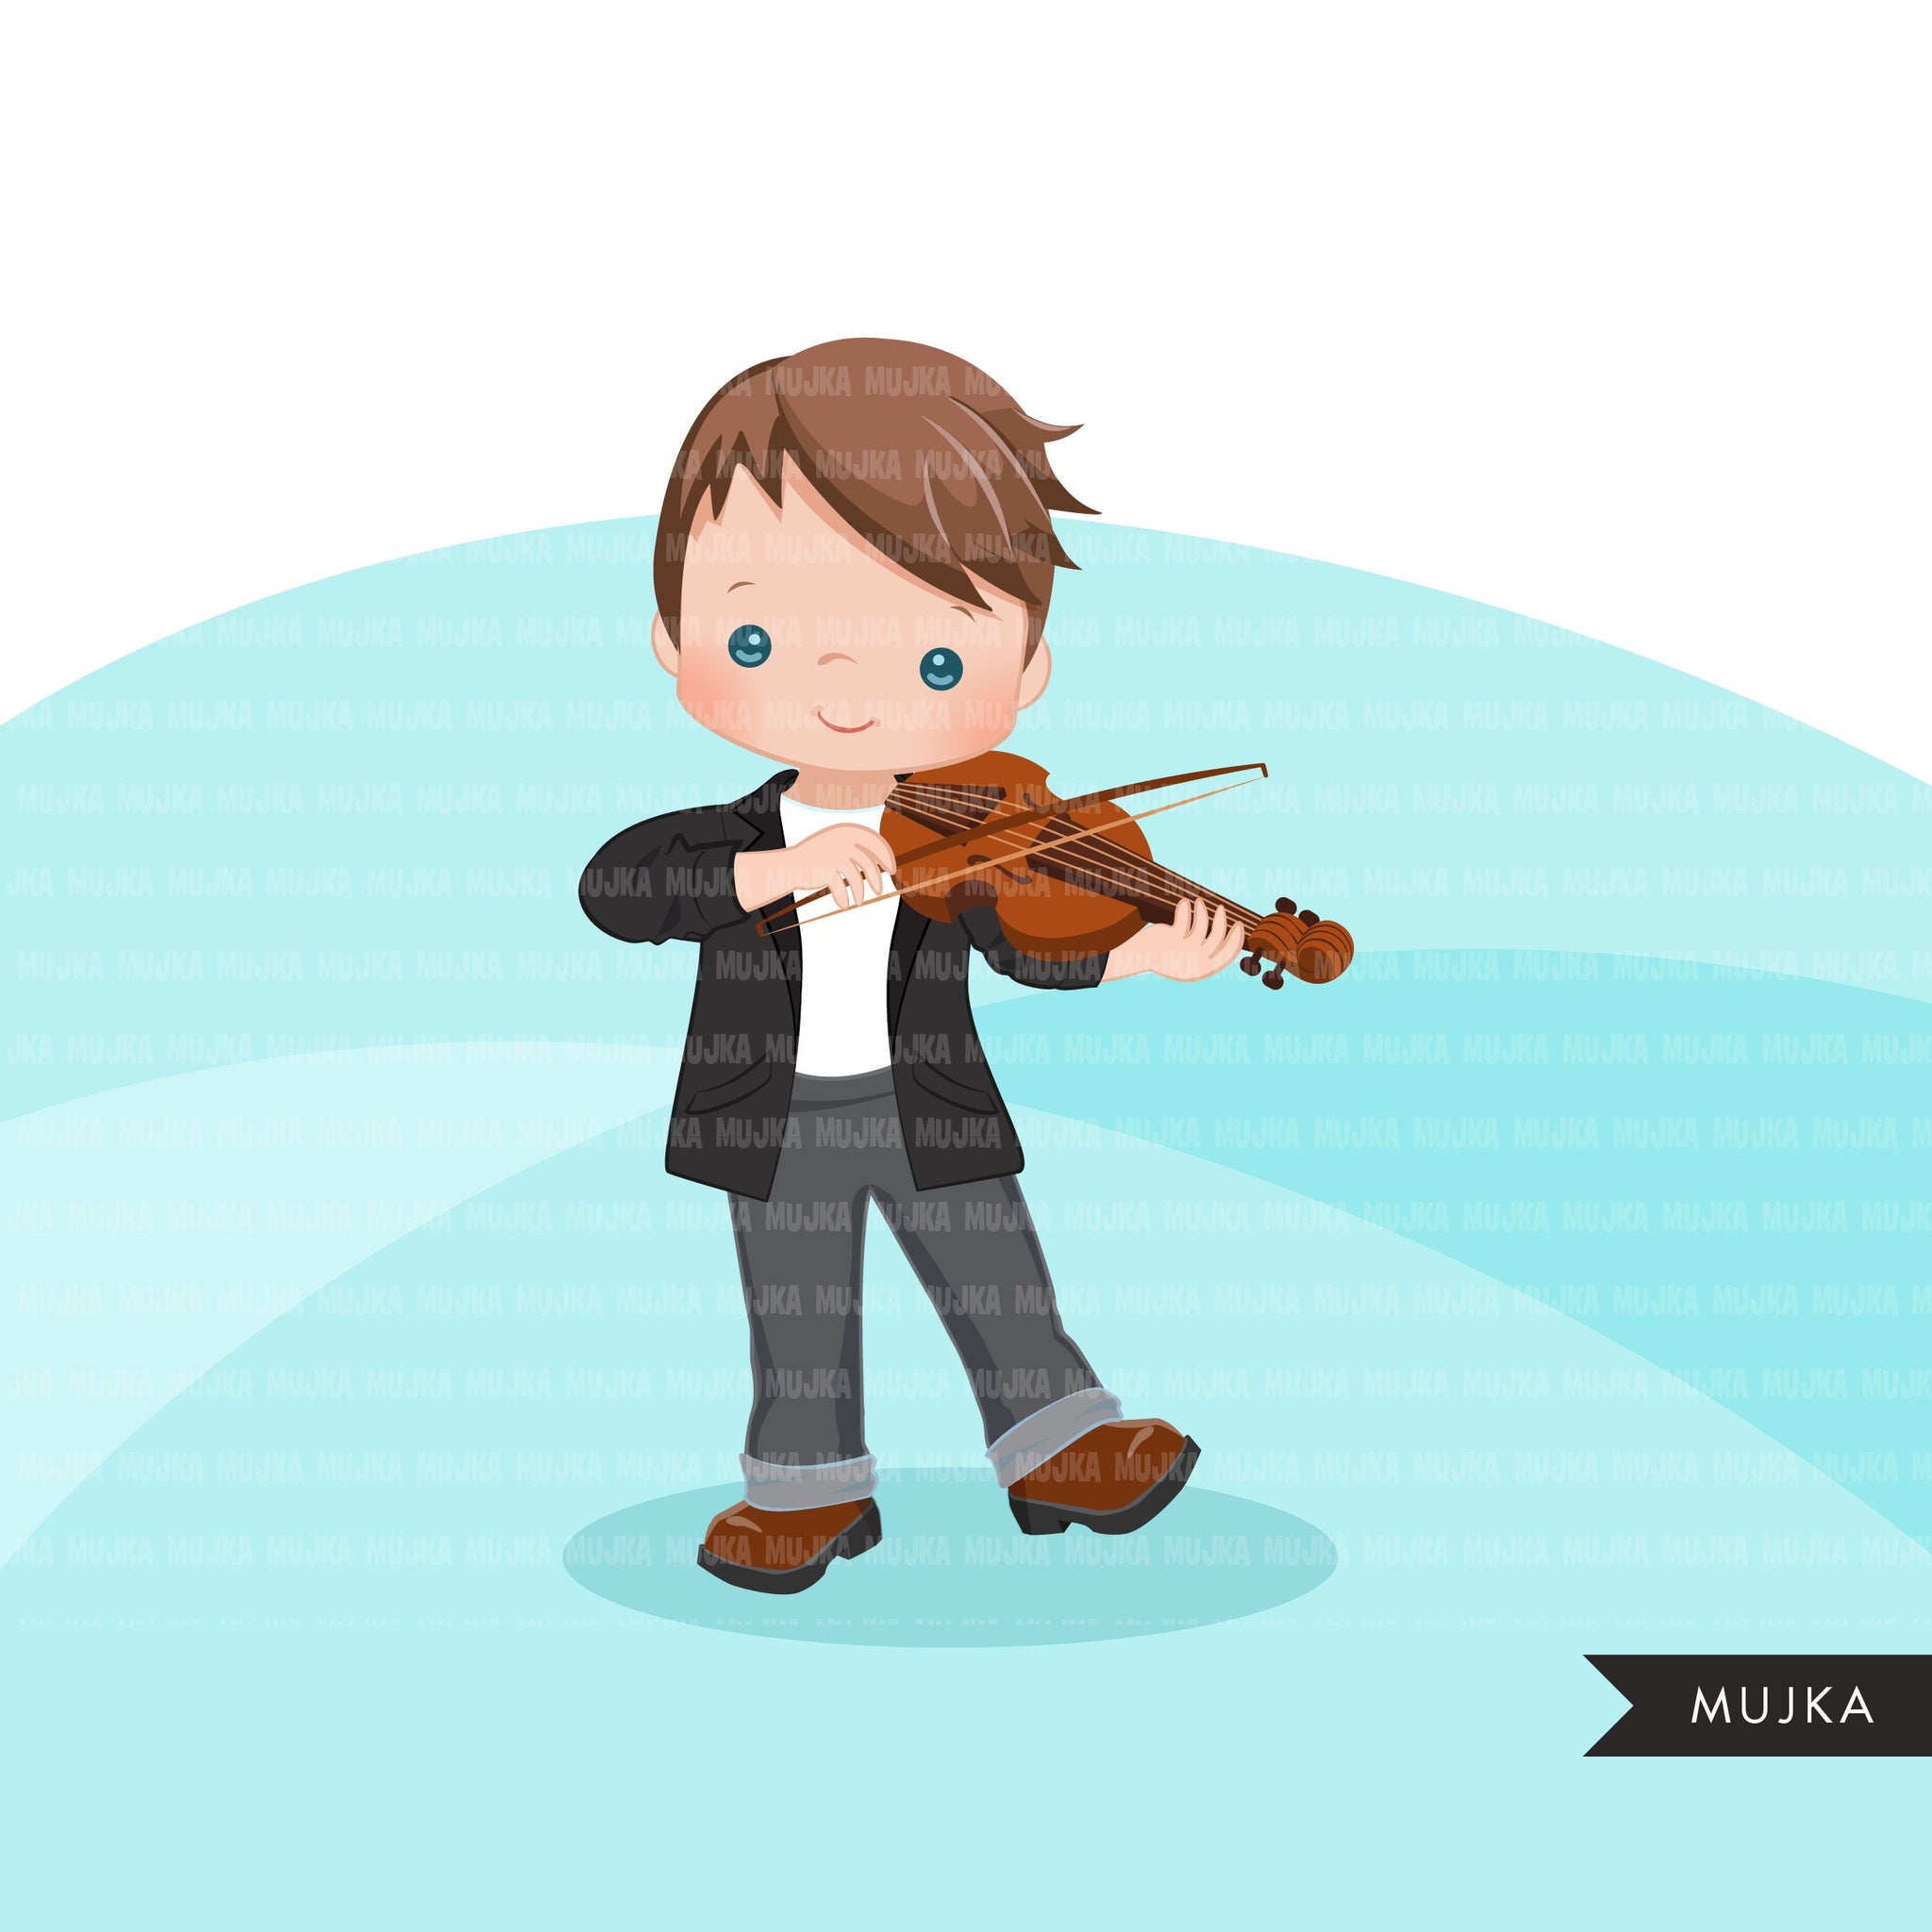 Violin clipart, Music Instruments clipart, education graphics, school band, kids playing music sublimation graphics, PNG clip art